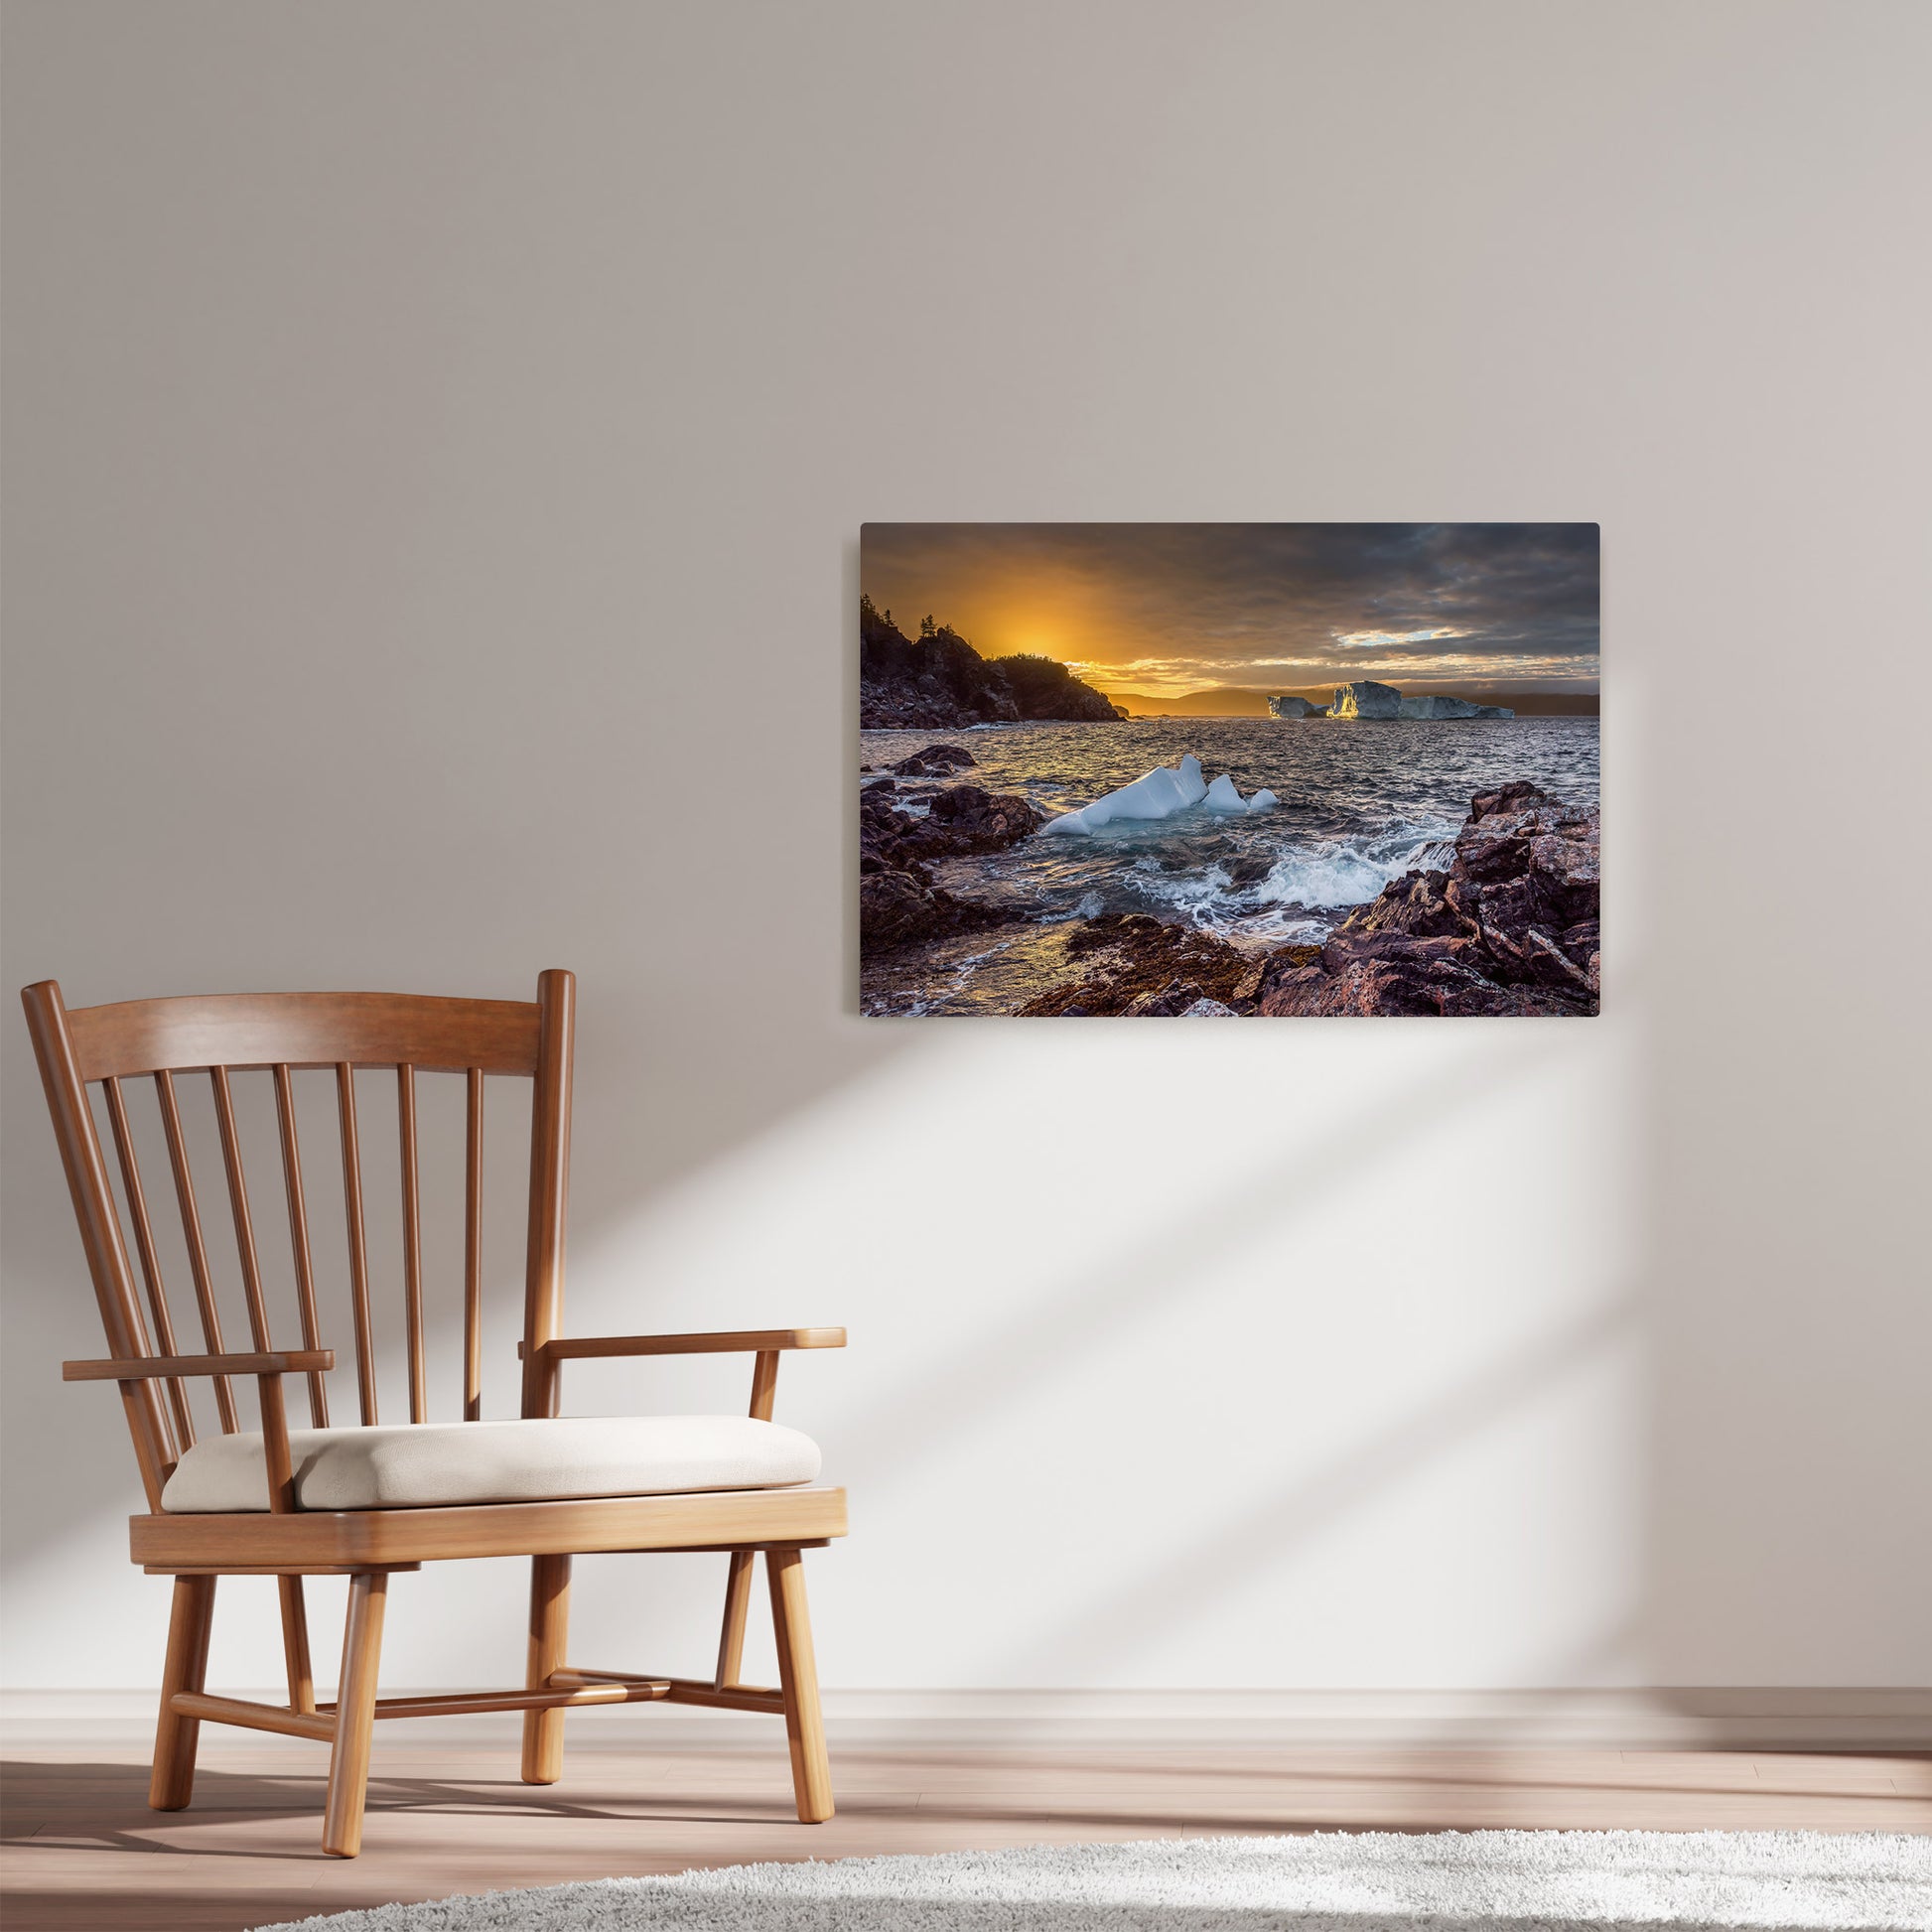  Ray Mackey's Brighton Berg Sunset photography reproduced on HD metal print and displayed on wall